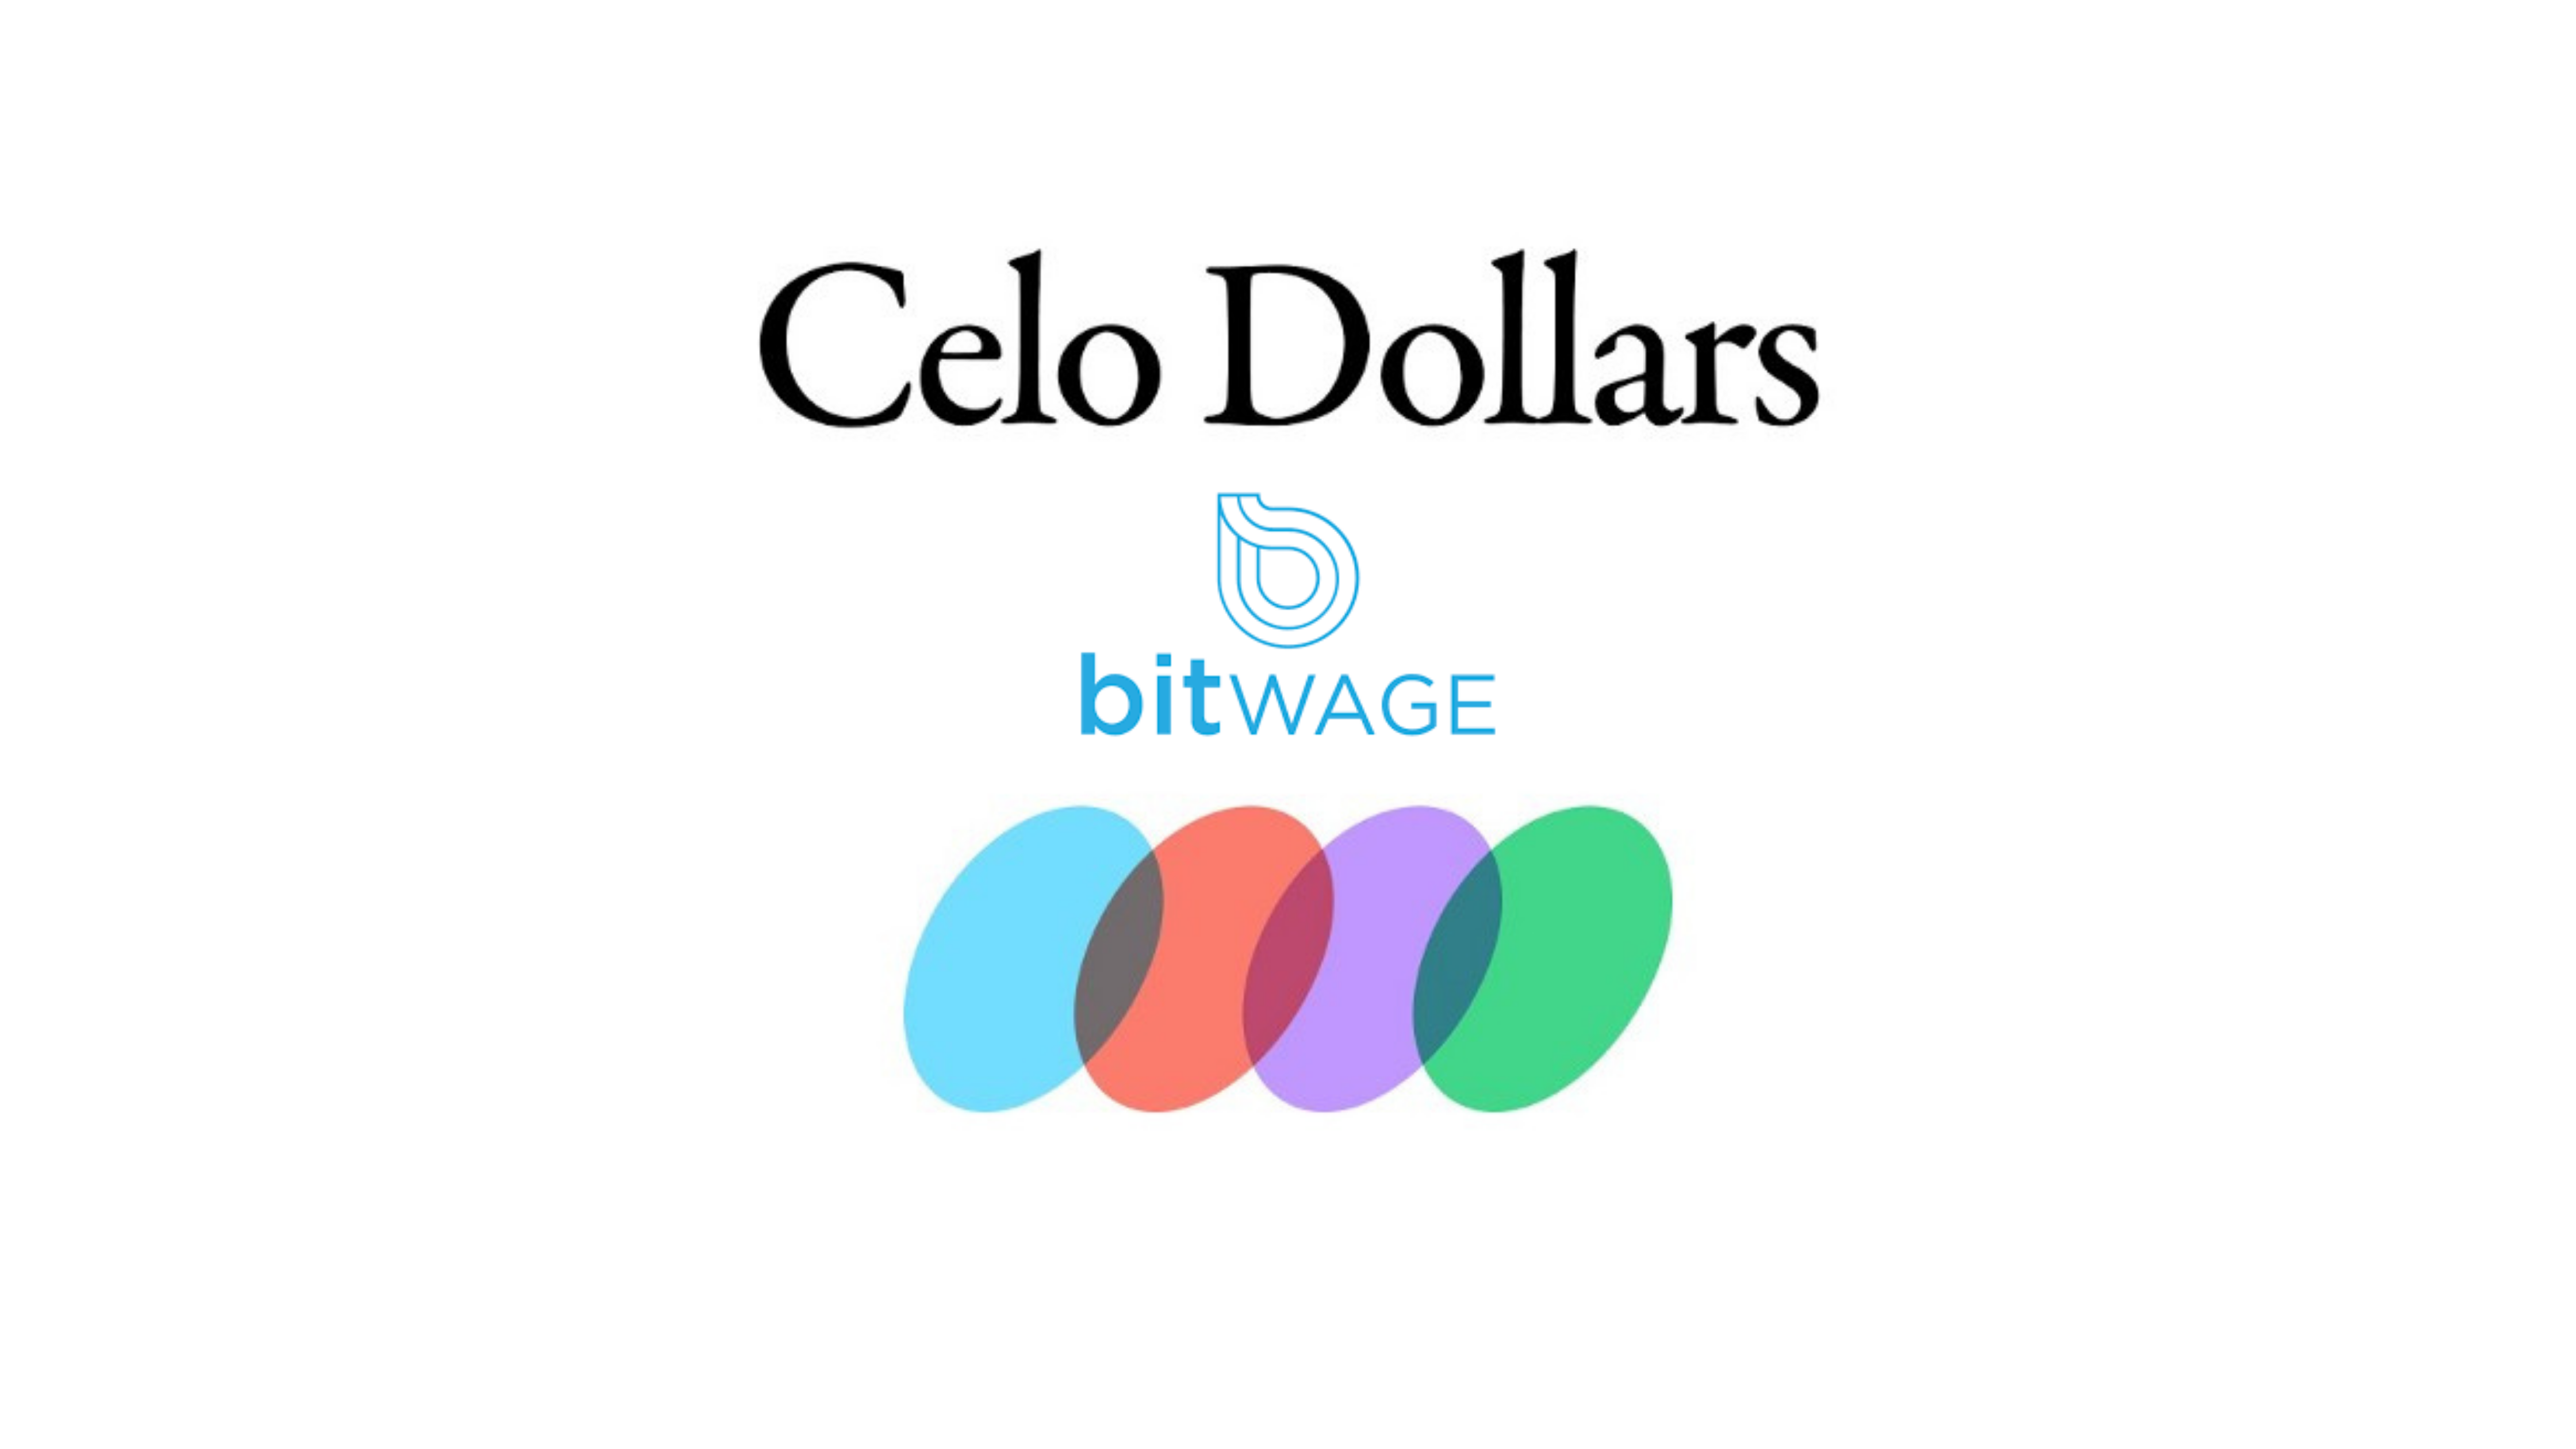 Bitwage Adds New Stablecoin (cUSD) in Partnership with Celo